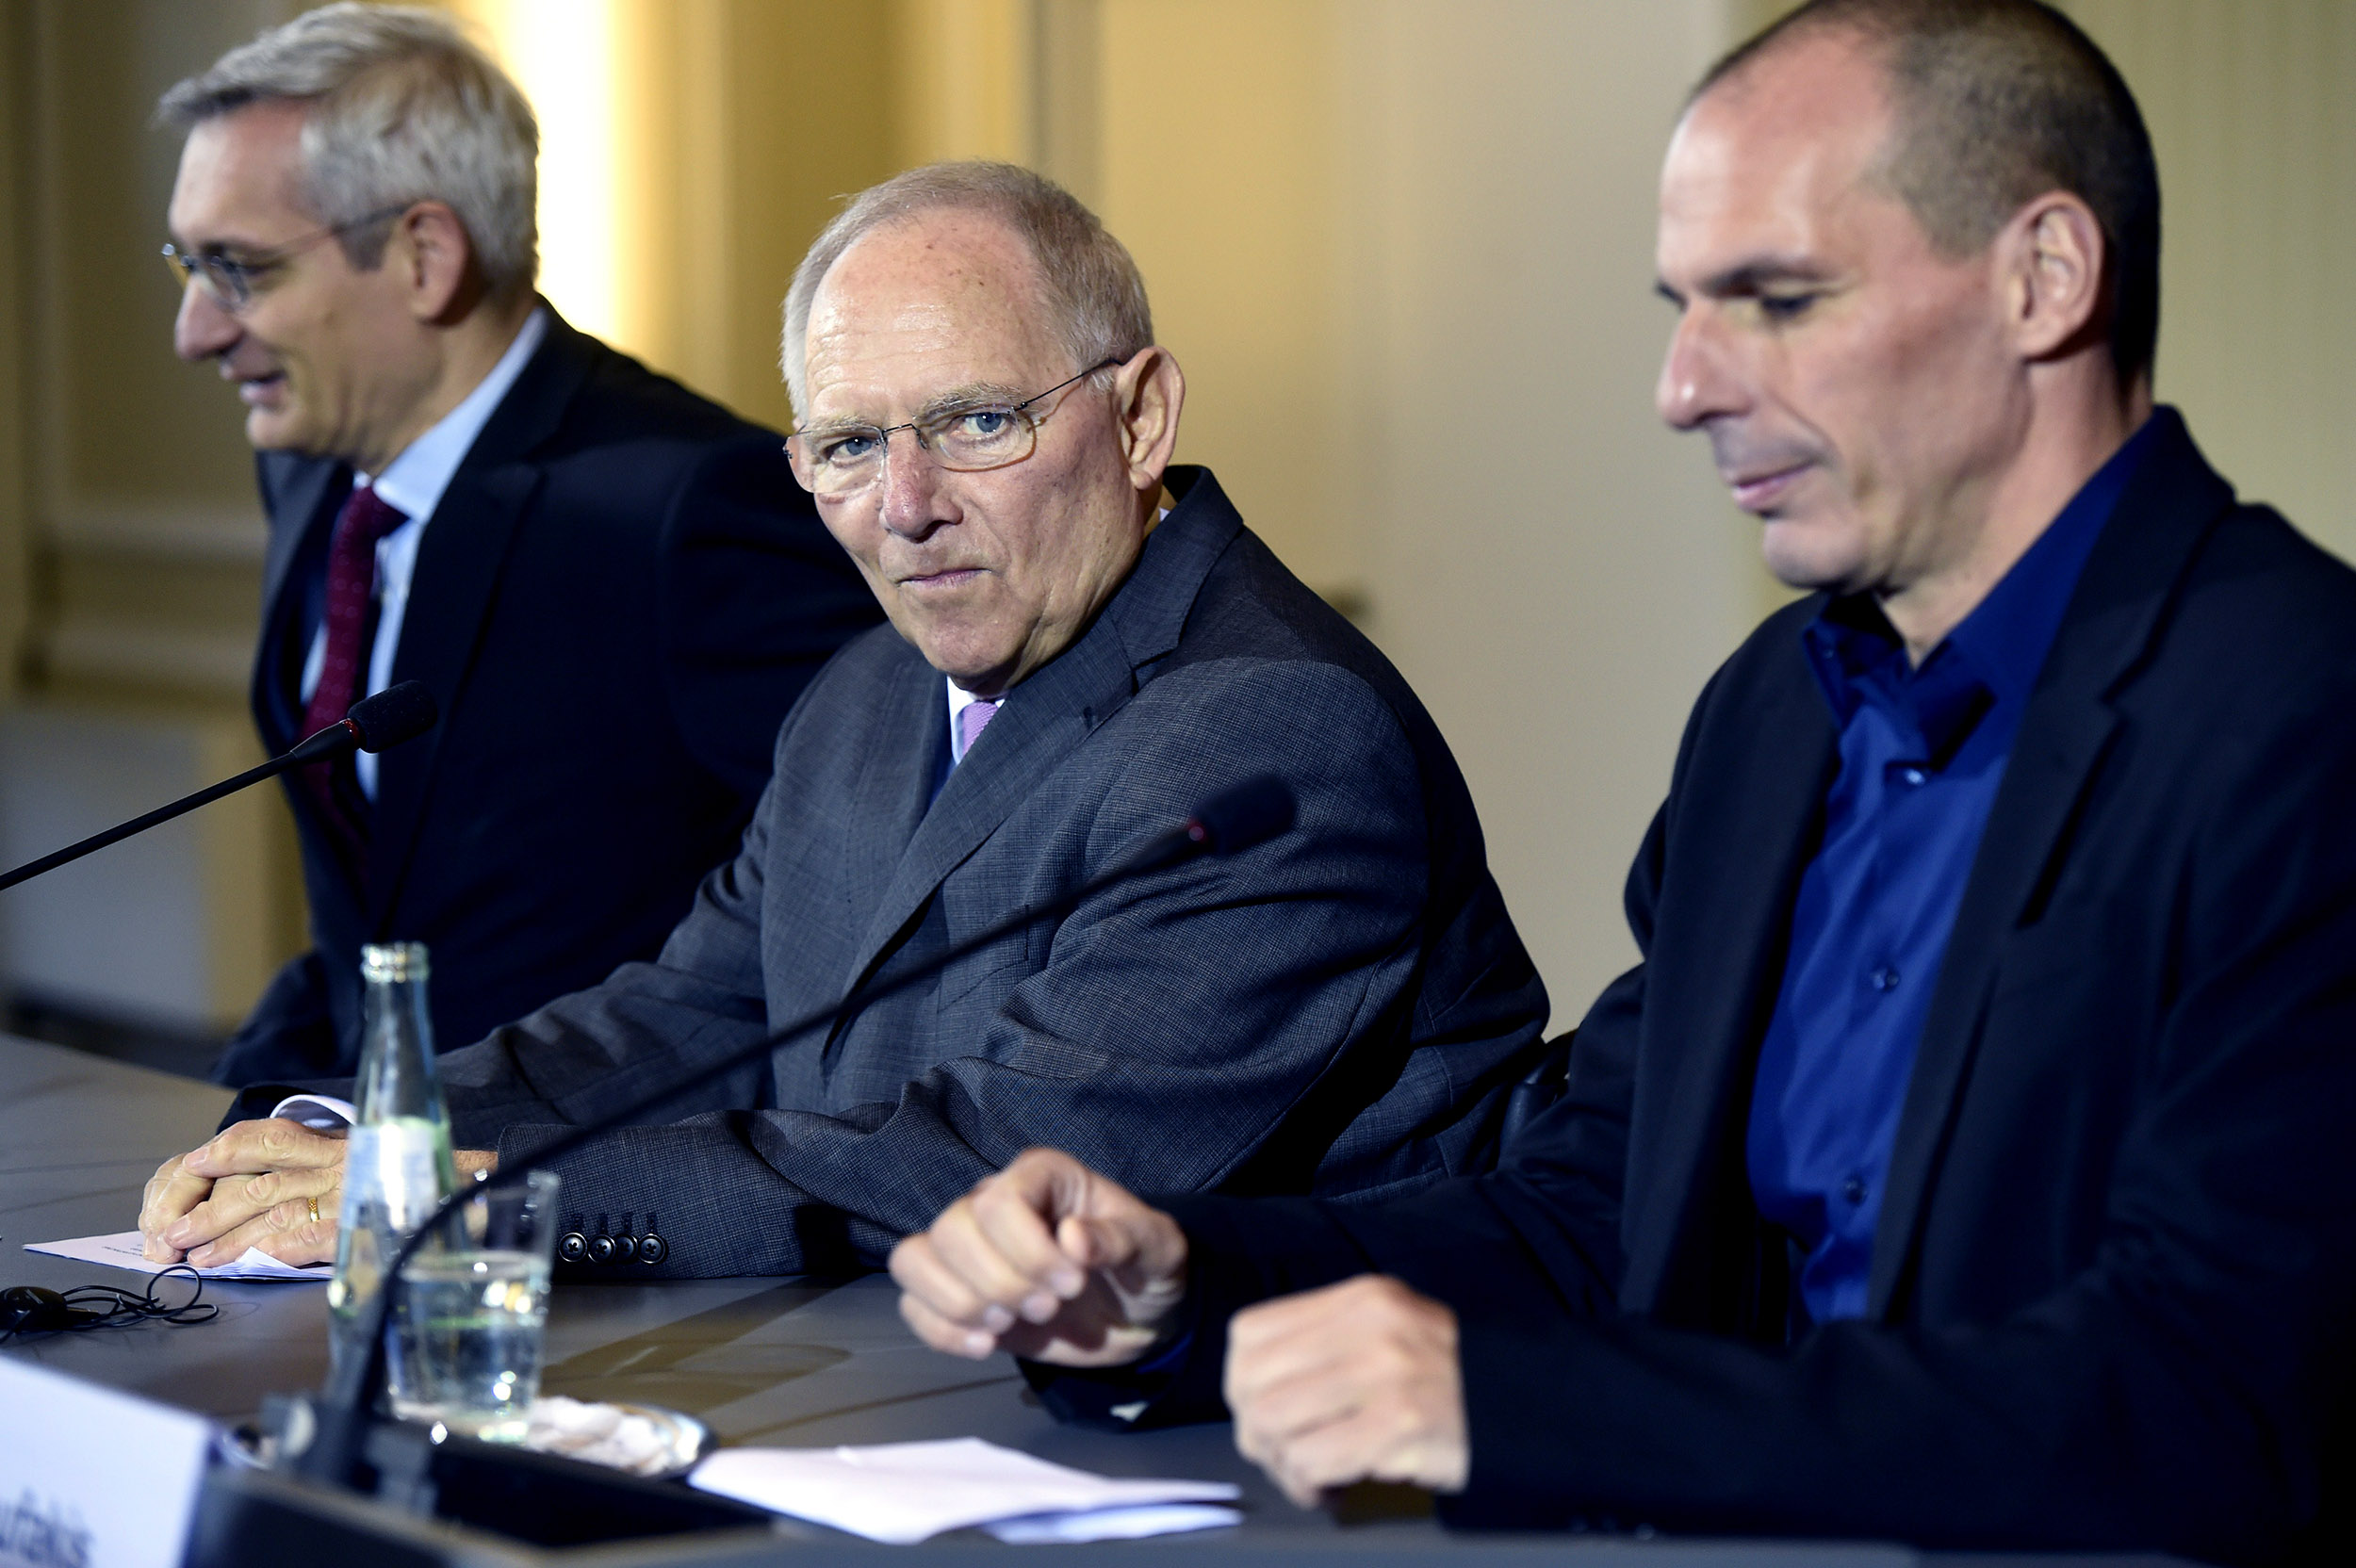 Greece's new Finance Minister Yanis Varoufakis (R) and his German counterpart Wolfgang Schaeuble (C) give a joint press conference with German Finance Ministry Spokesman Martin Jaeger (L) following their meeting on Feb. 5, 2015 at the Finance ministry in Berlin.
